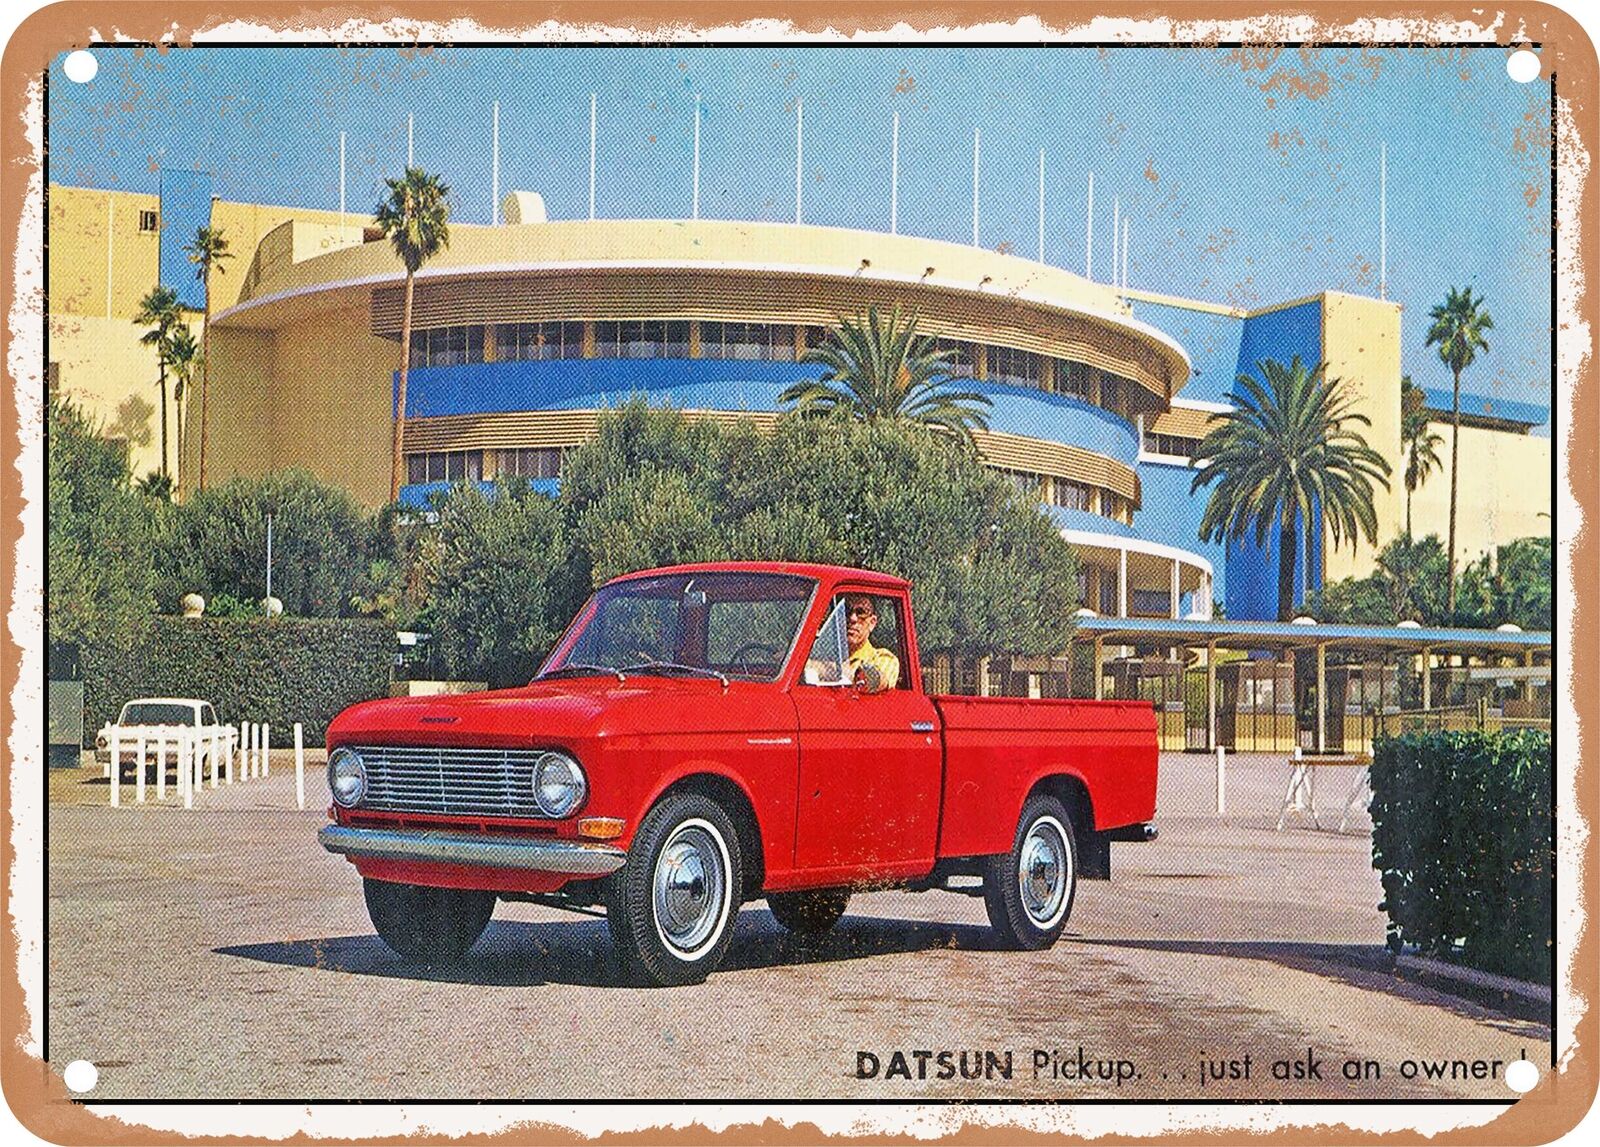 METAL SIGN - 1966 Datsun Pickup. Just Ask an Owner Vintage Ad